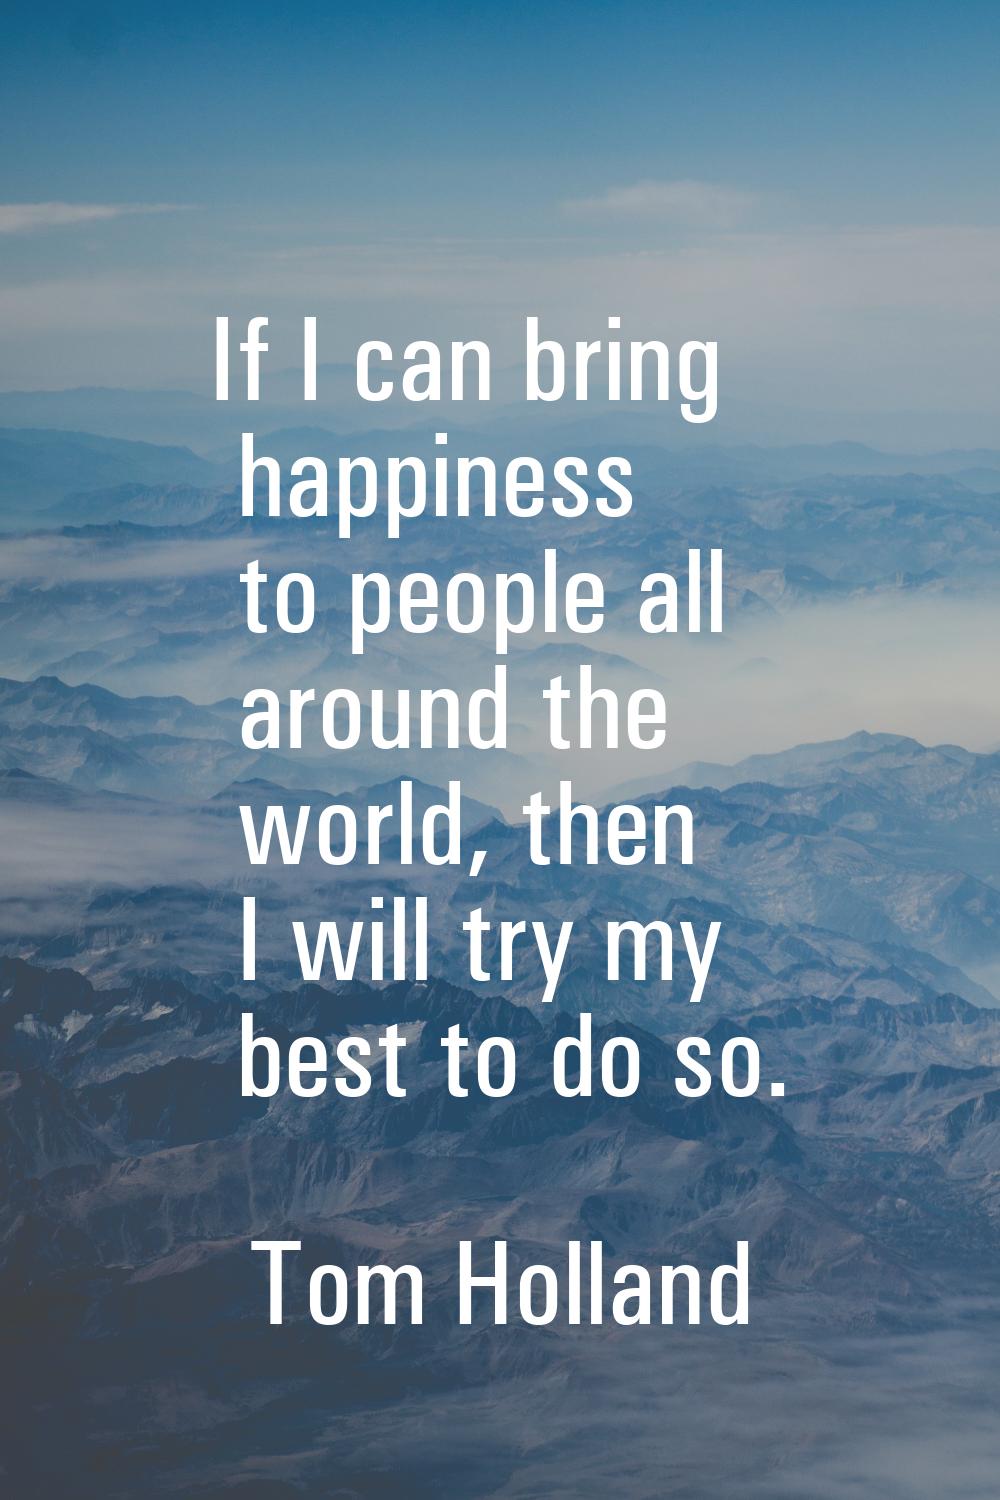 If I can bring happiness to people all around the world, then I will try my best to do so.